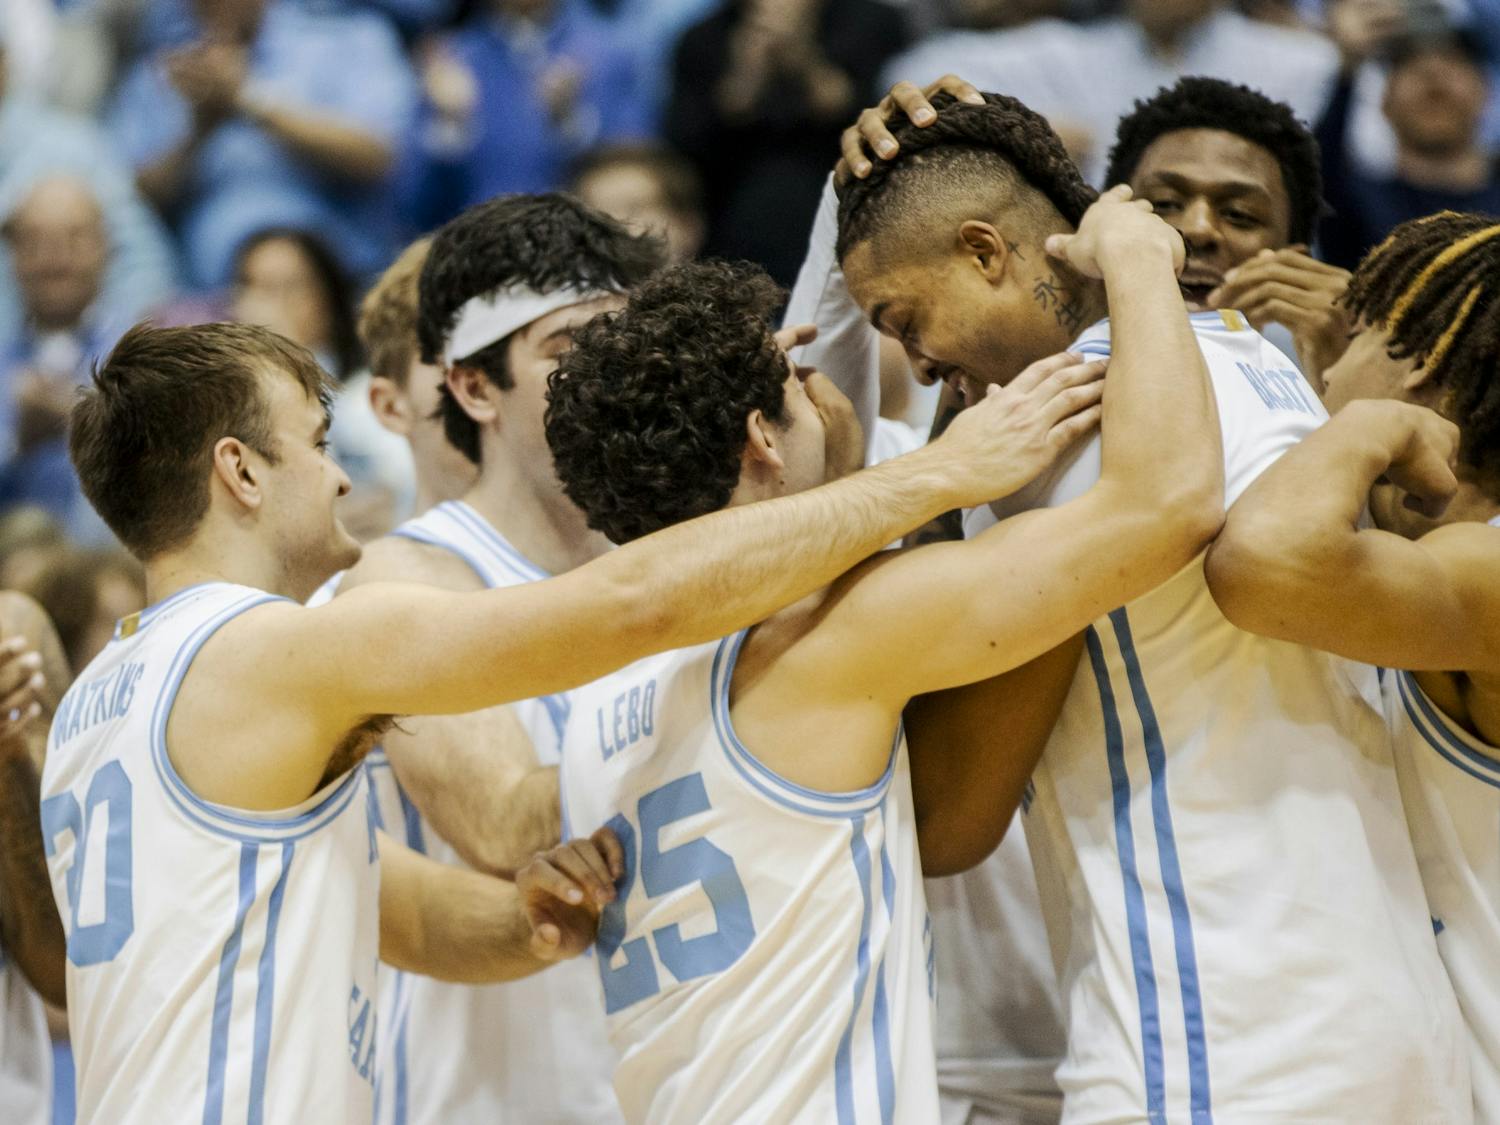 UNC senior forward Armando Bacot (5) is embraced by his teammates after setting a record for the most career double-doubles during a basketball game against N.C. State on Saturday, Jan. 21, 2023, in the Dean E. Smith Center. UNC won 80-69.